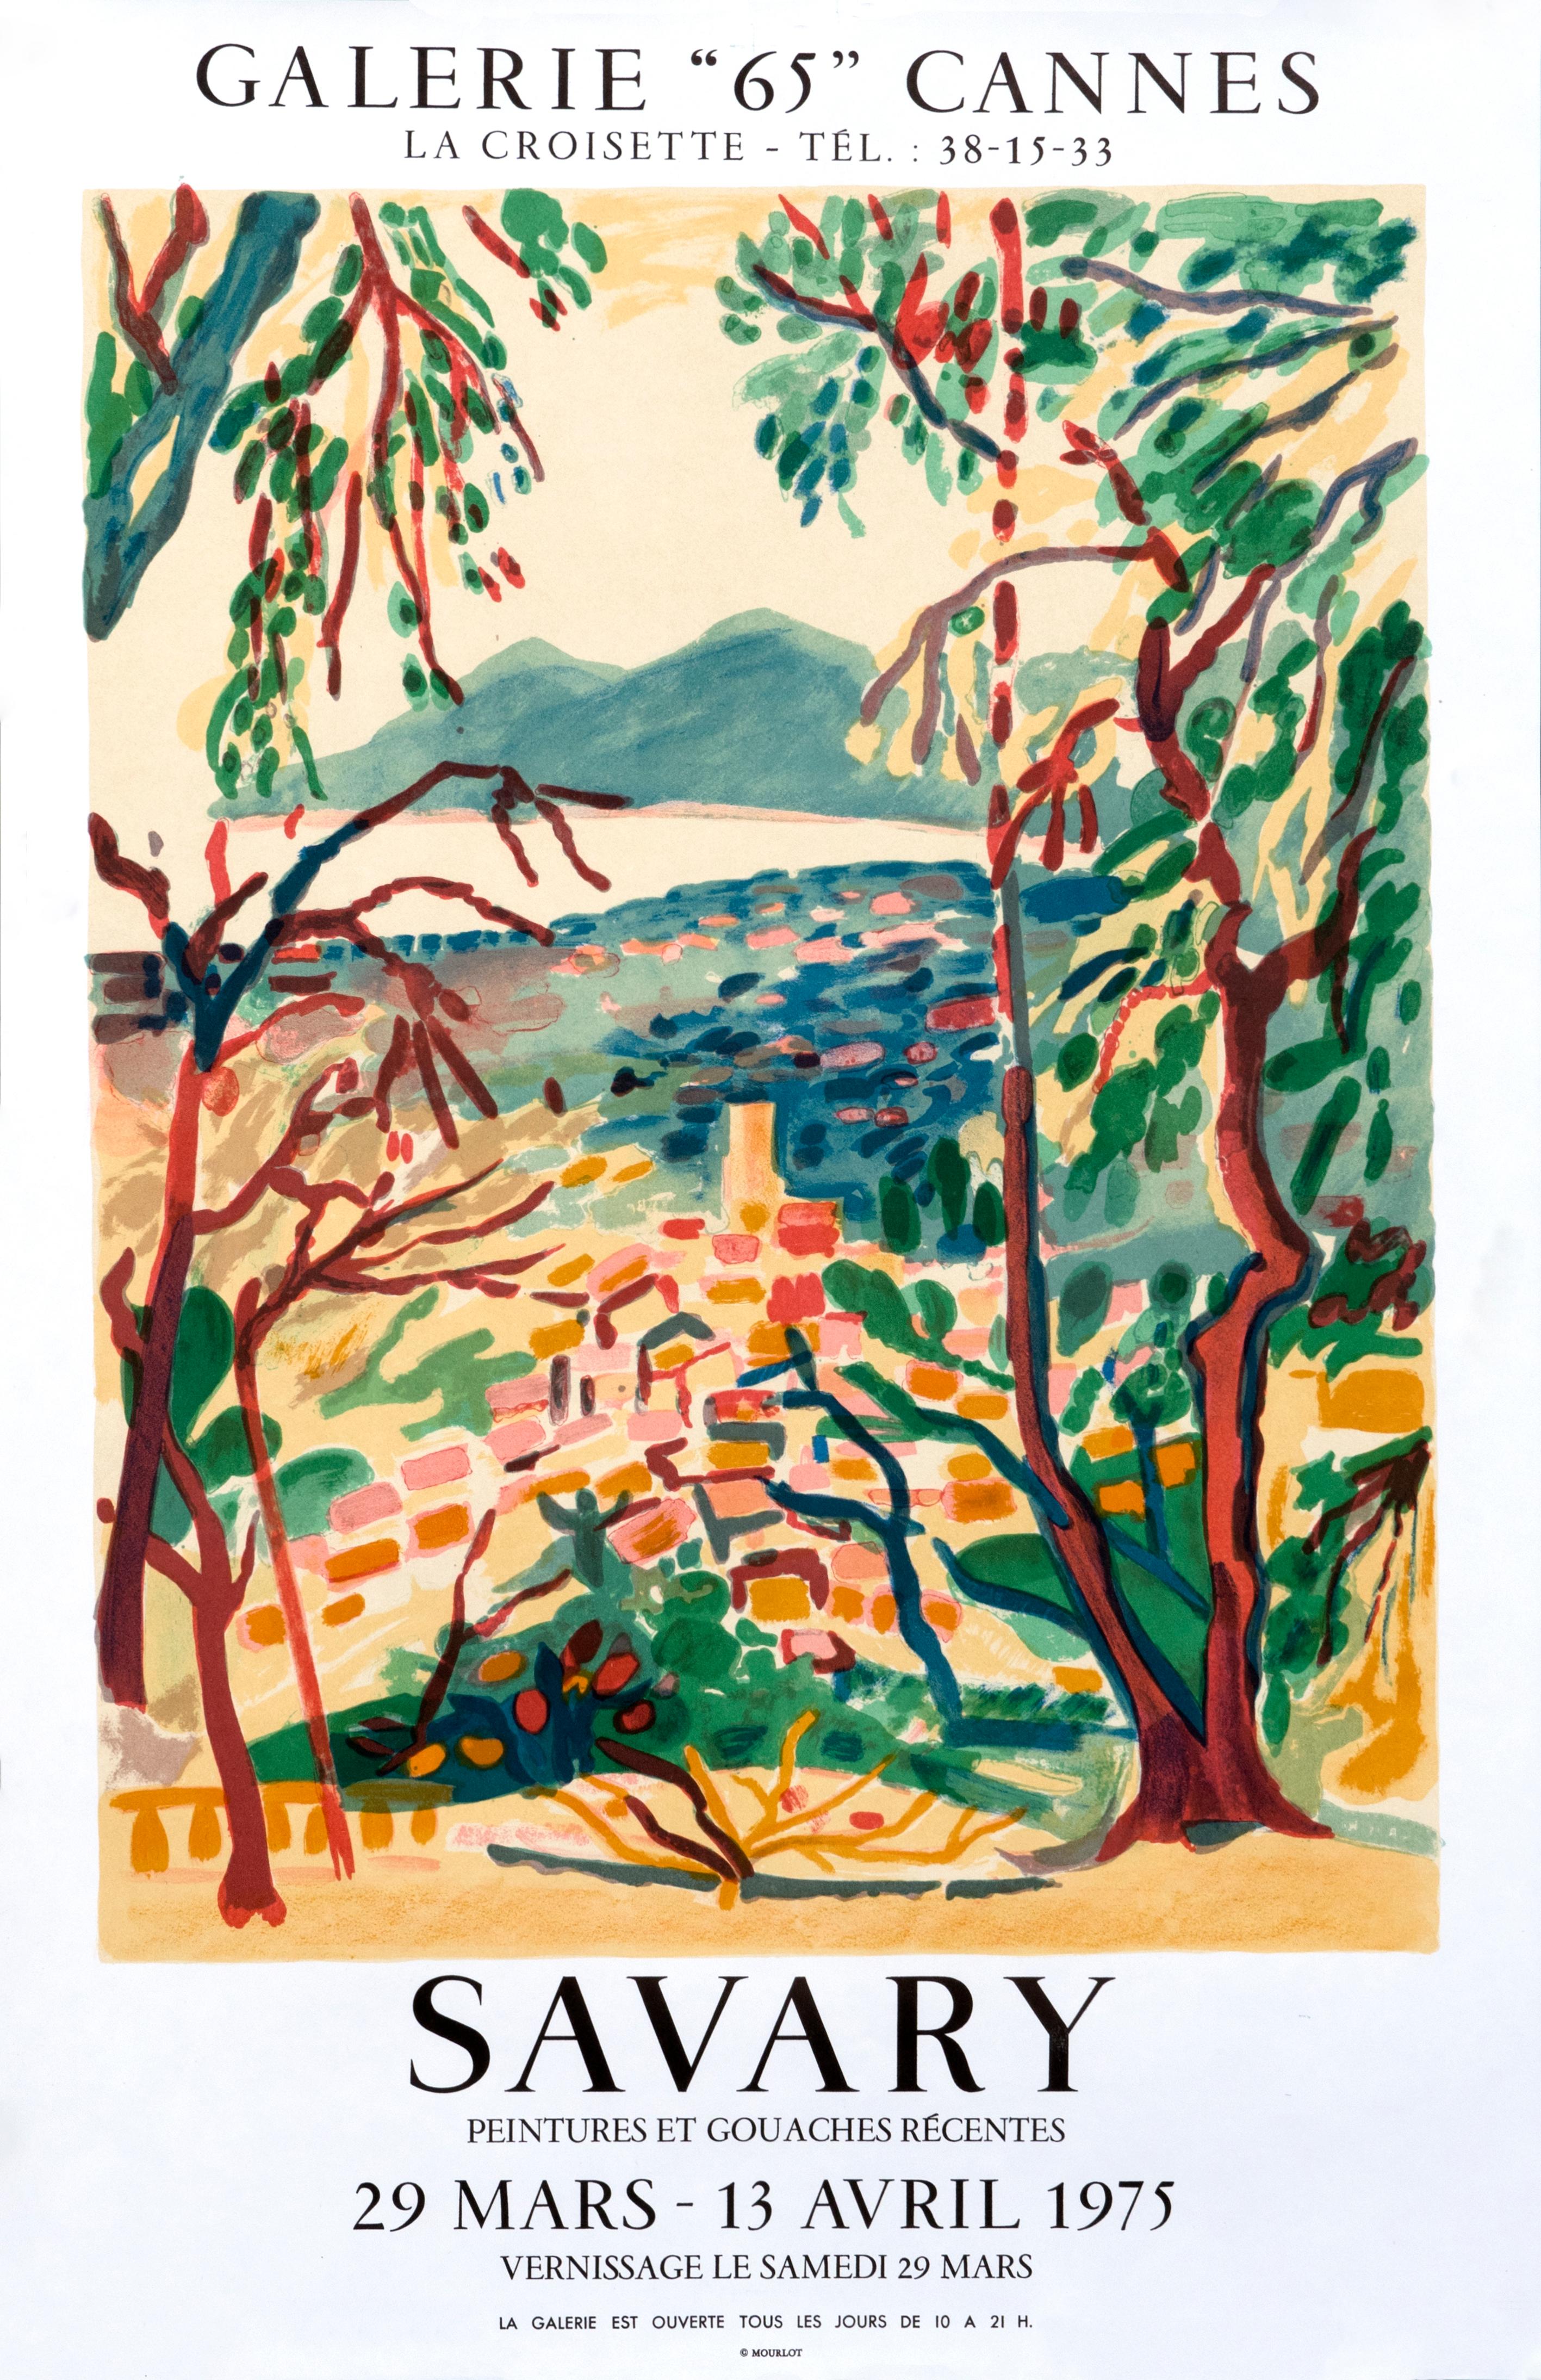 "Savary - Galerie 65 Cannes" Vintage French Riviera Grasse Landscape poster - Print by Robert Savary